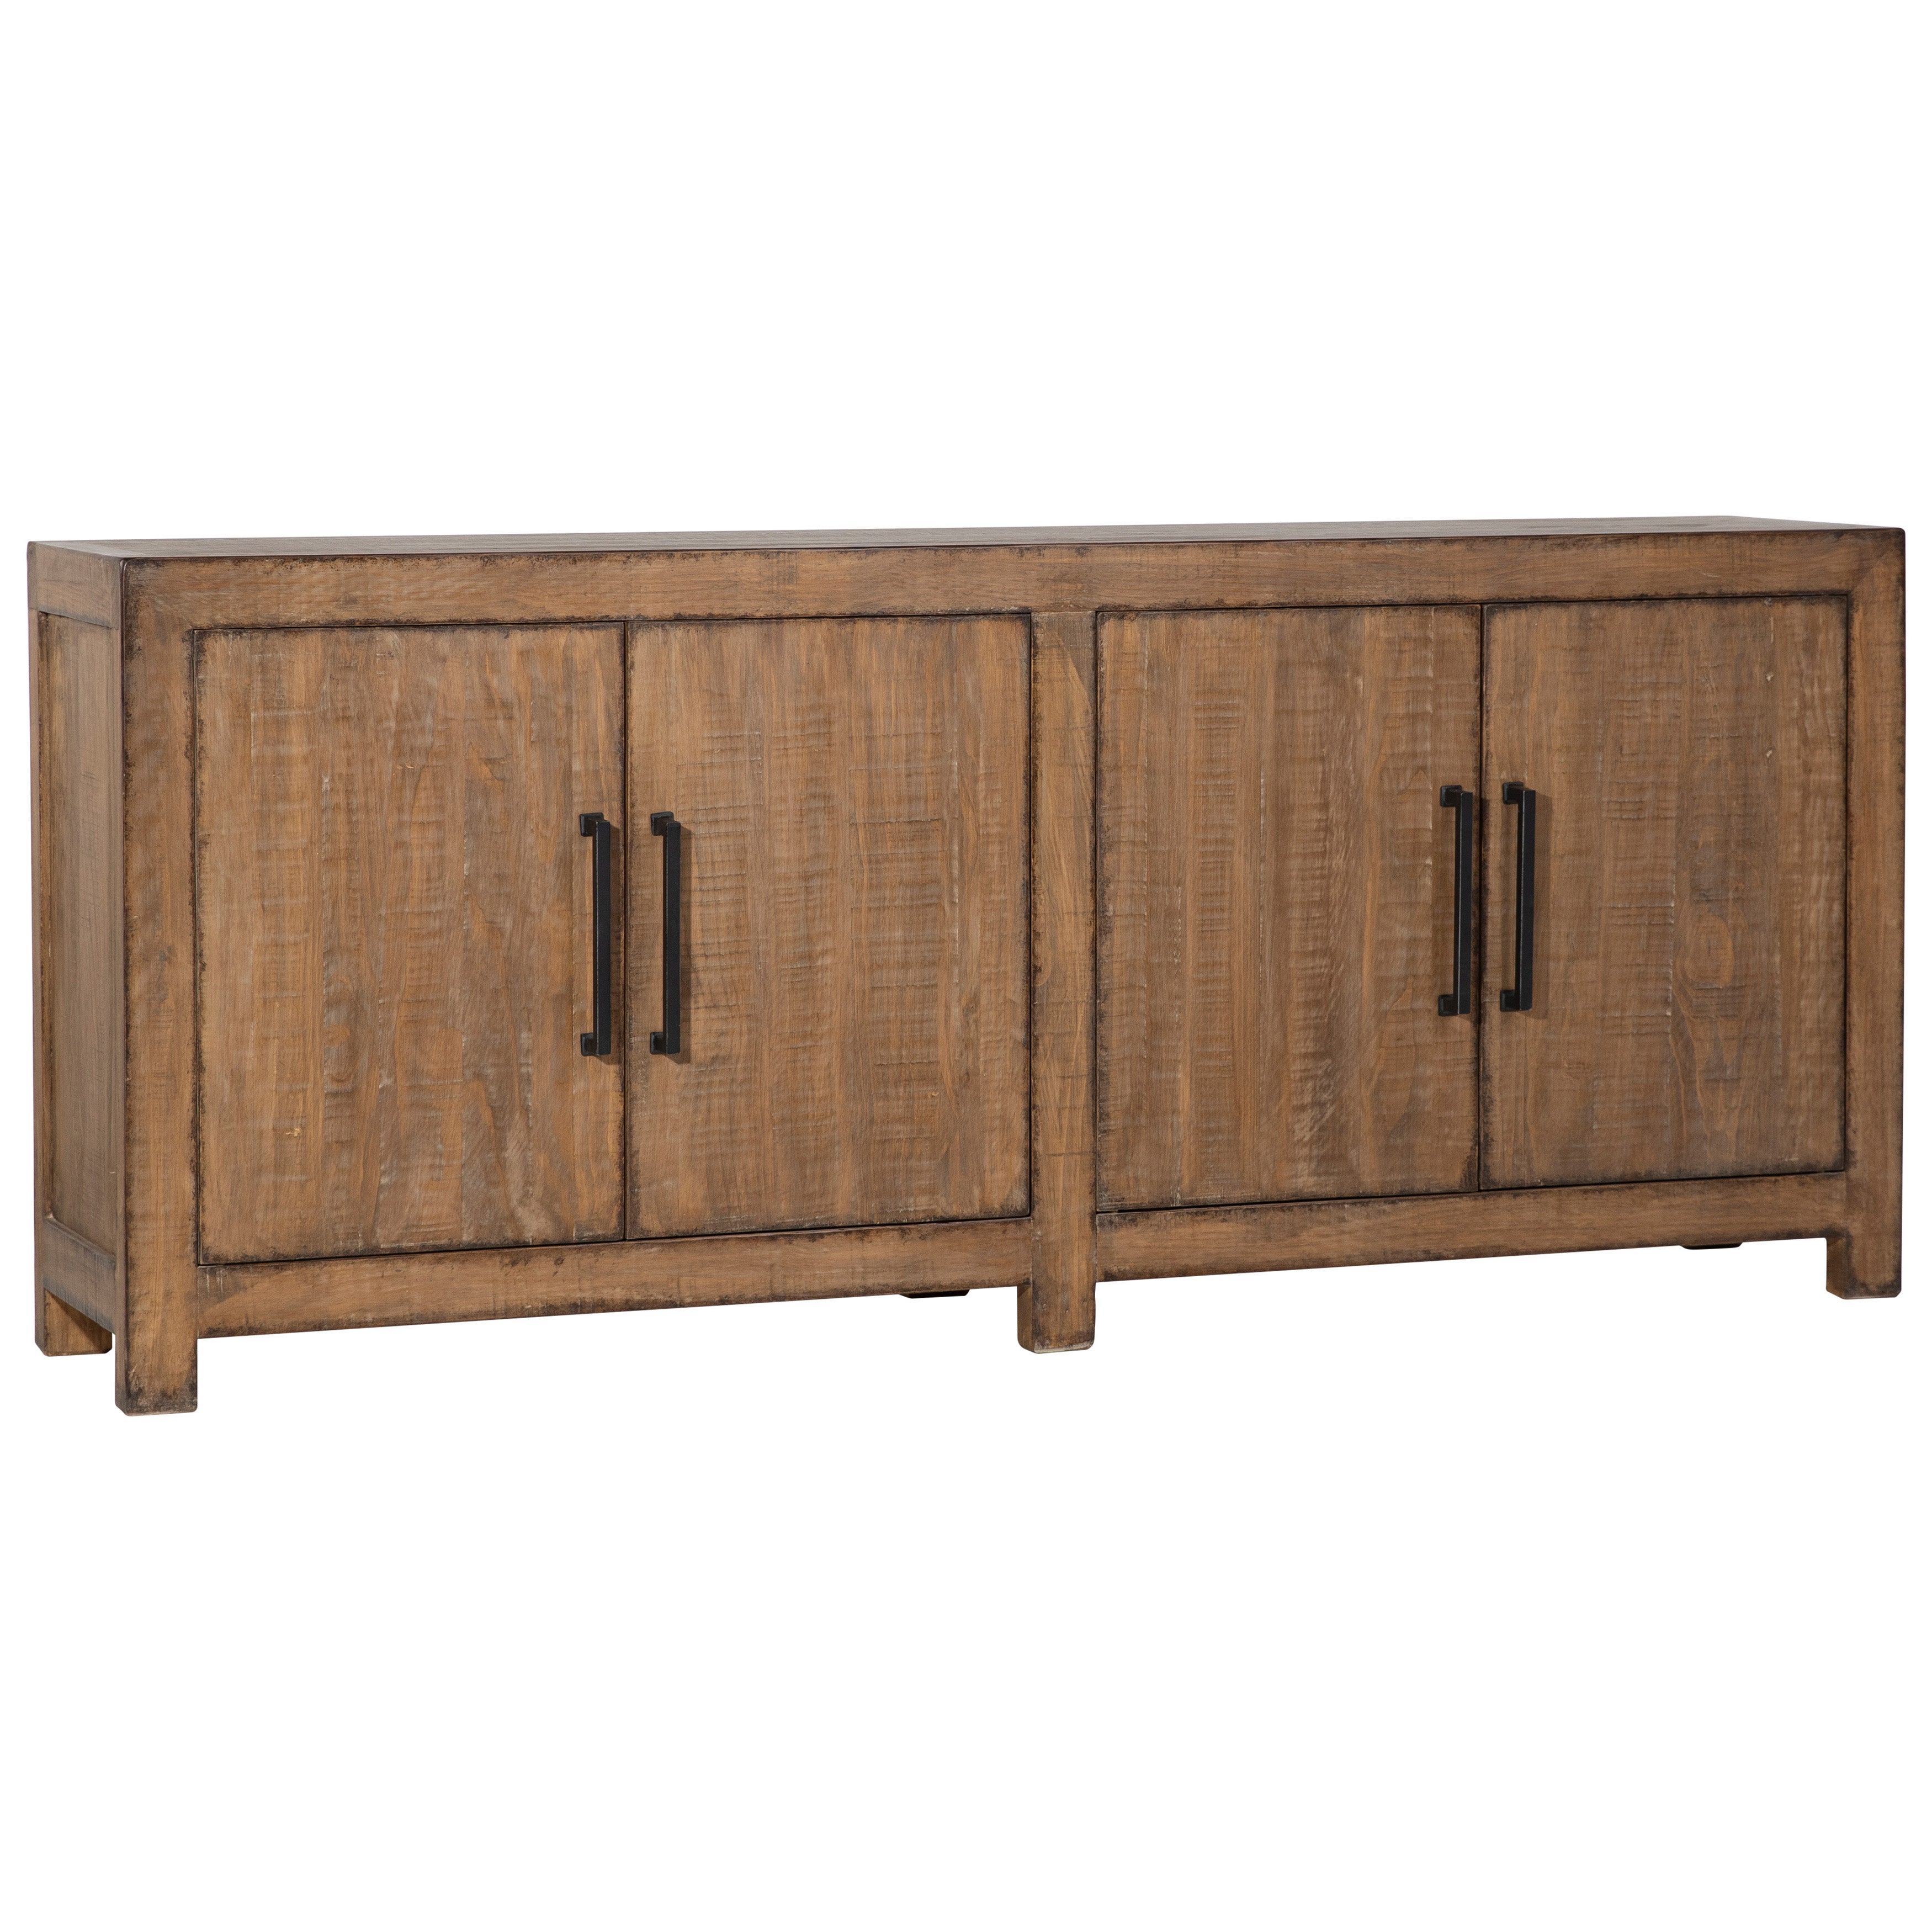 Merwin Sideboard - What A Room